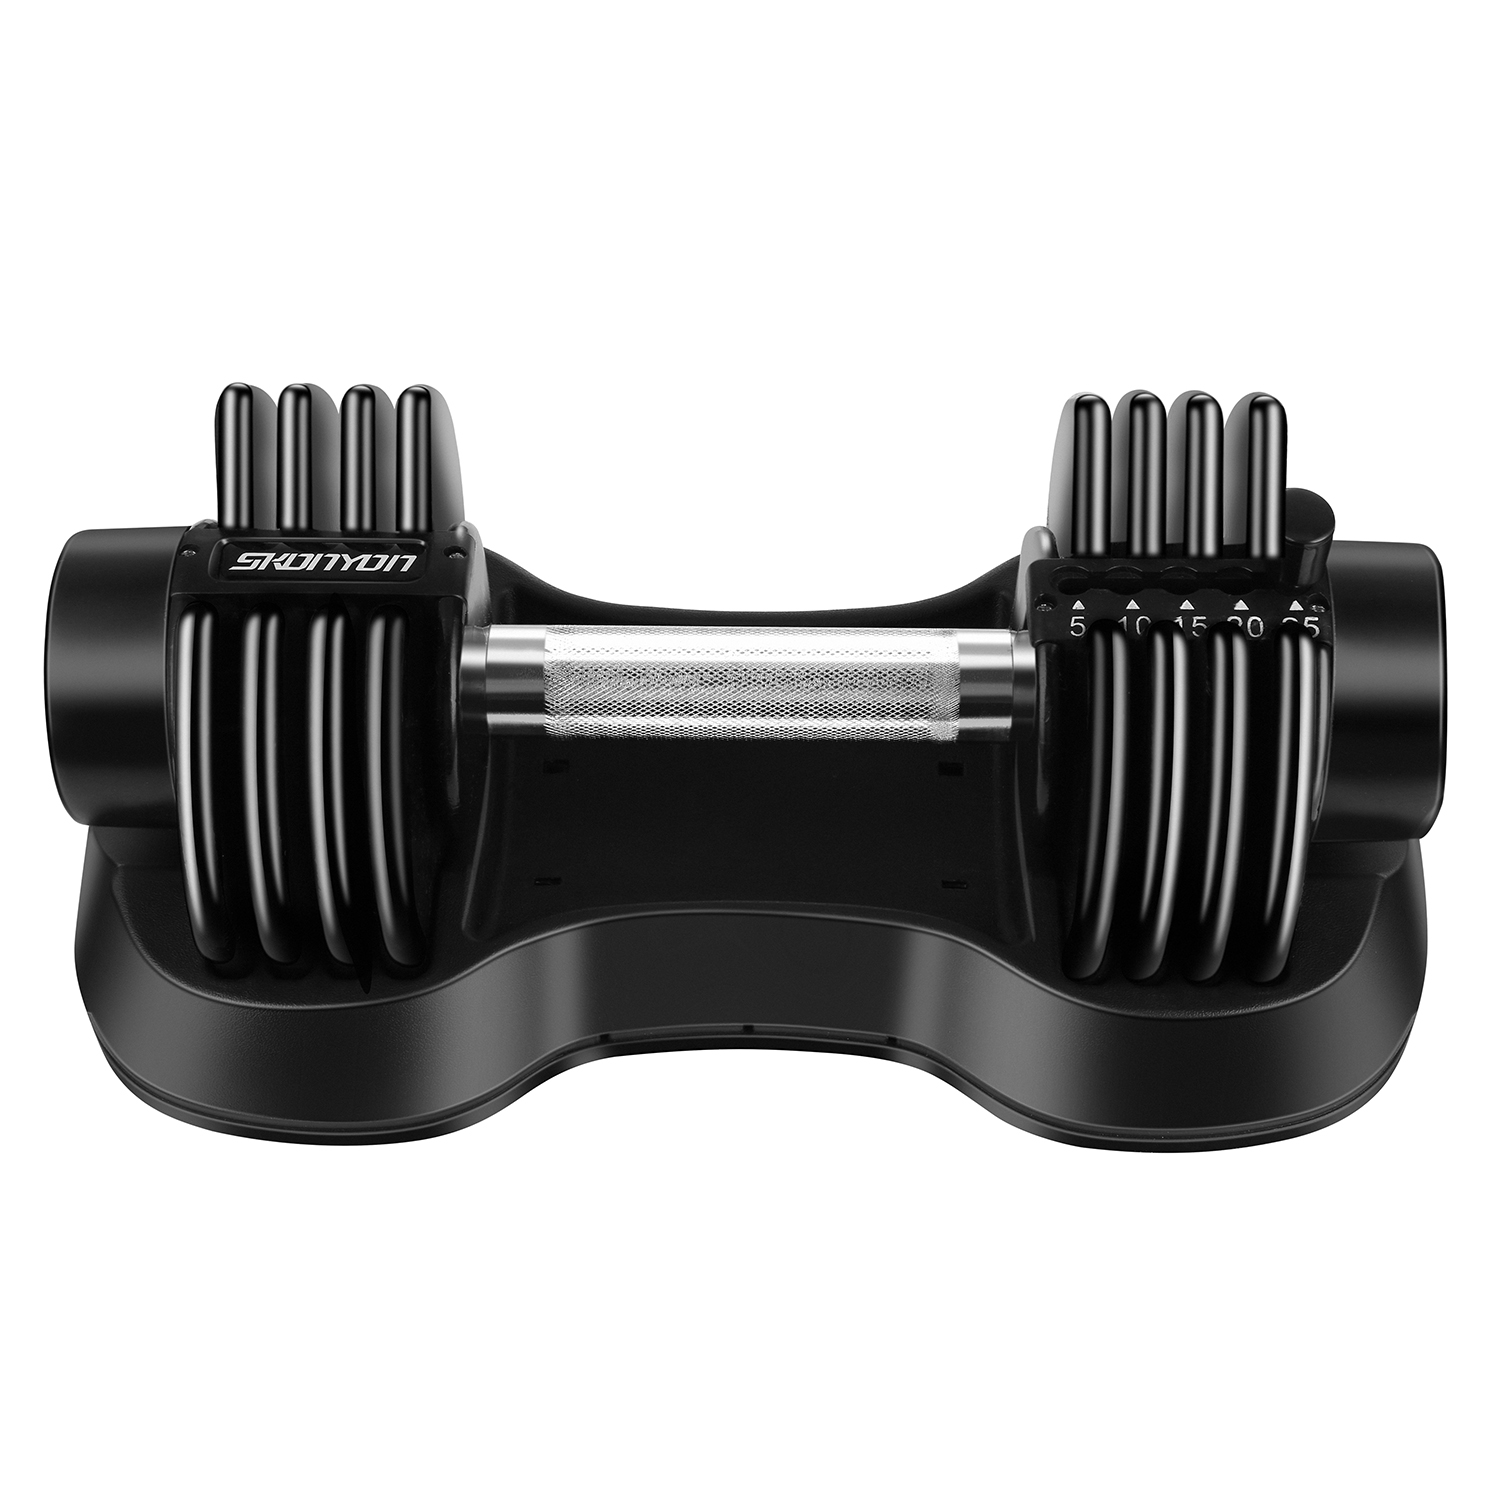 Adjustable Dumbbell Barbell 25 lbs Weight with Handle and Weight Plate for Gym and Home, Black, Single - image 4 of 8